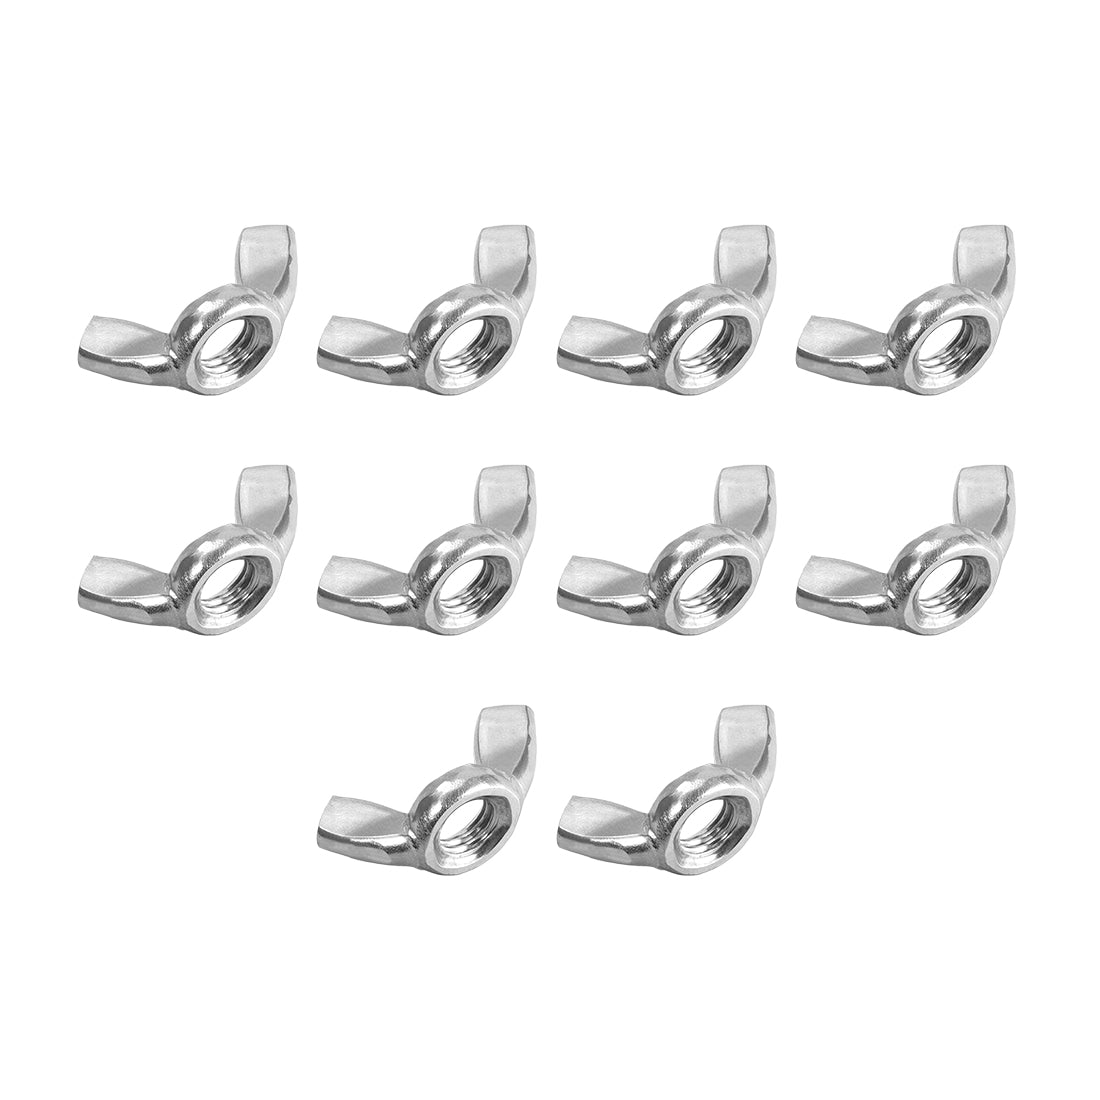 uxcell Uxcell Metric Wing Nuts, Carbon Steel Zinc Plated Hand Twist Tighten Ear Butterfly Nut, 10 Pcs